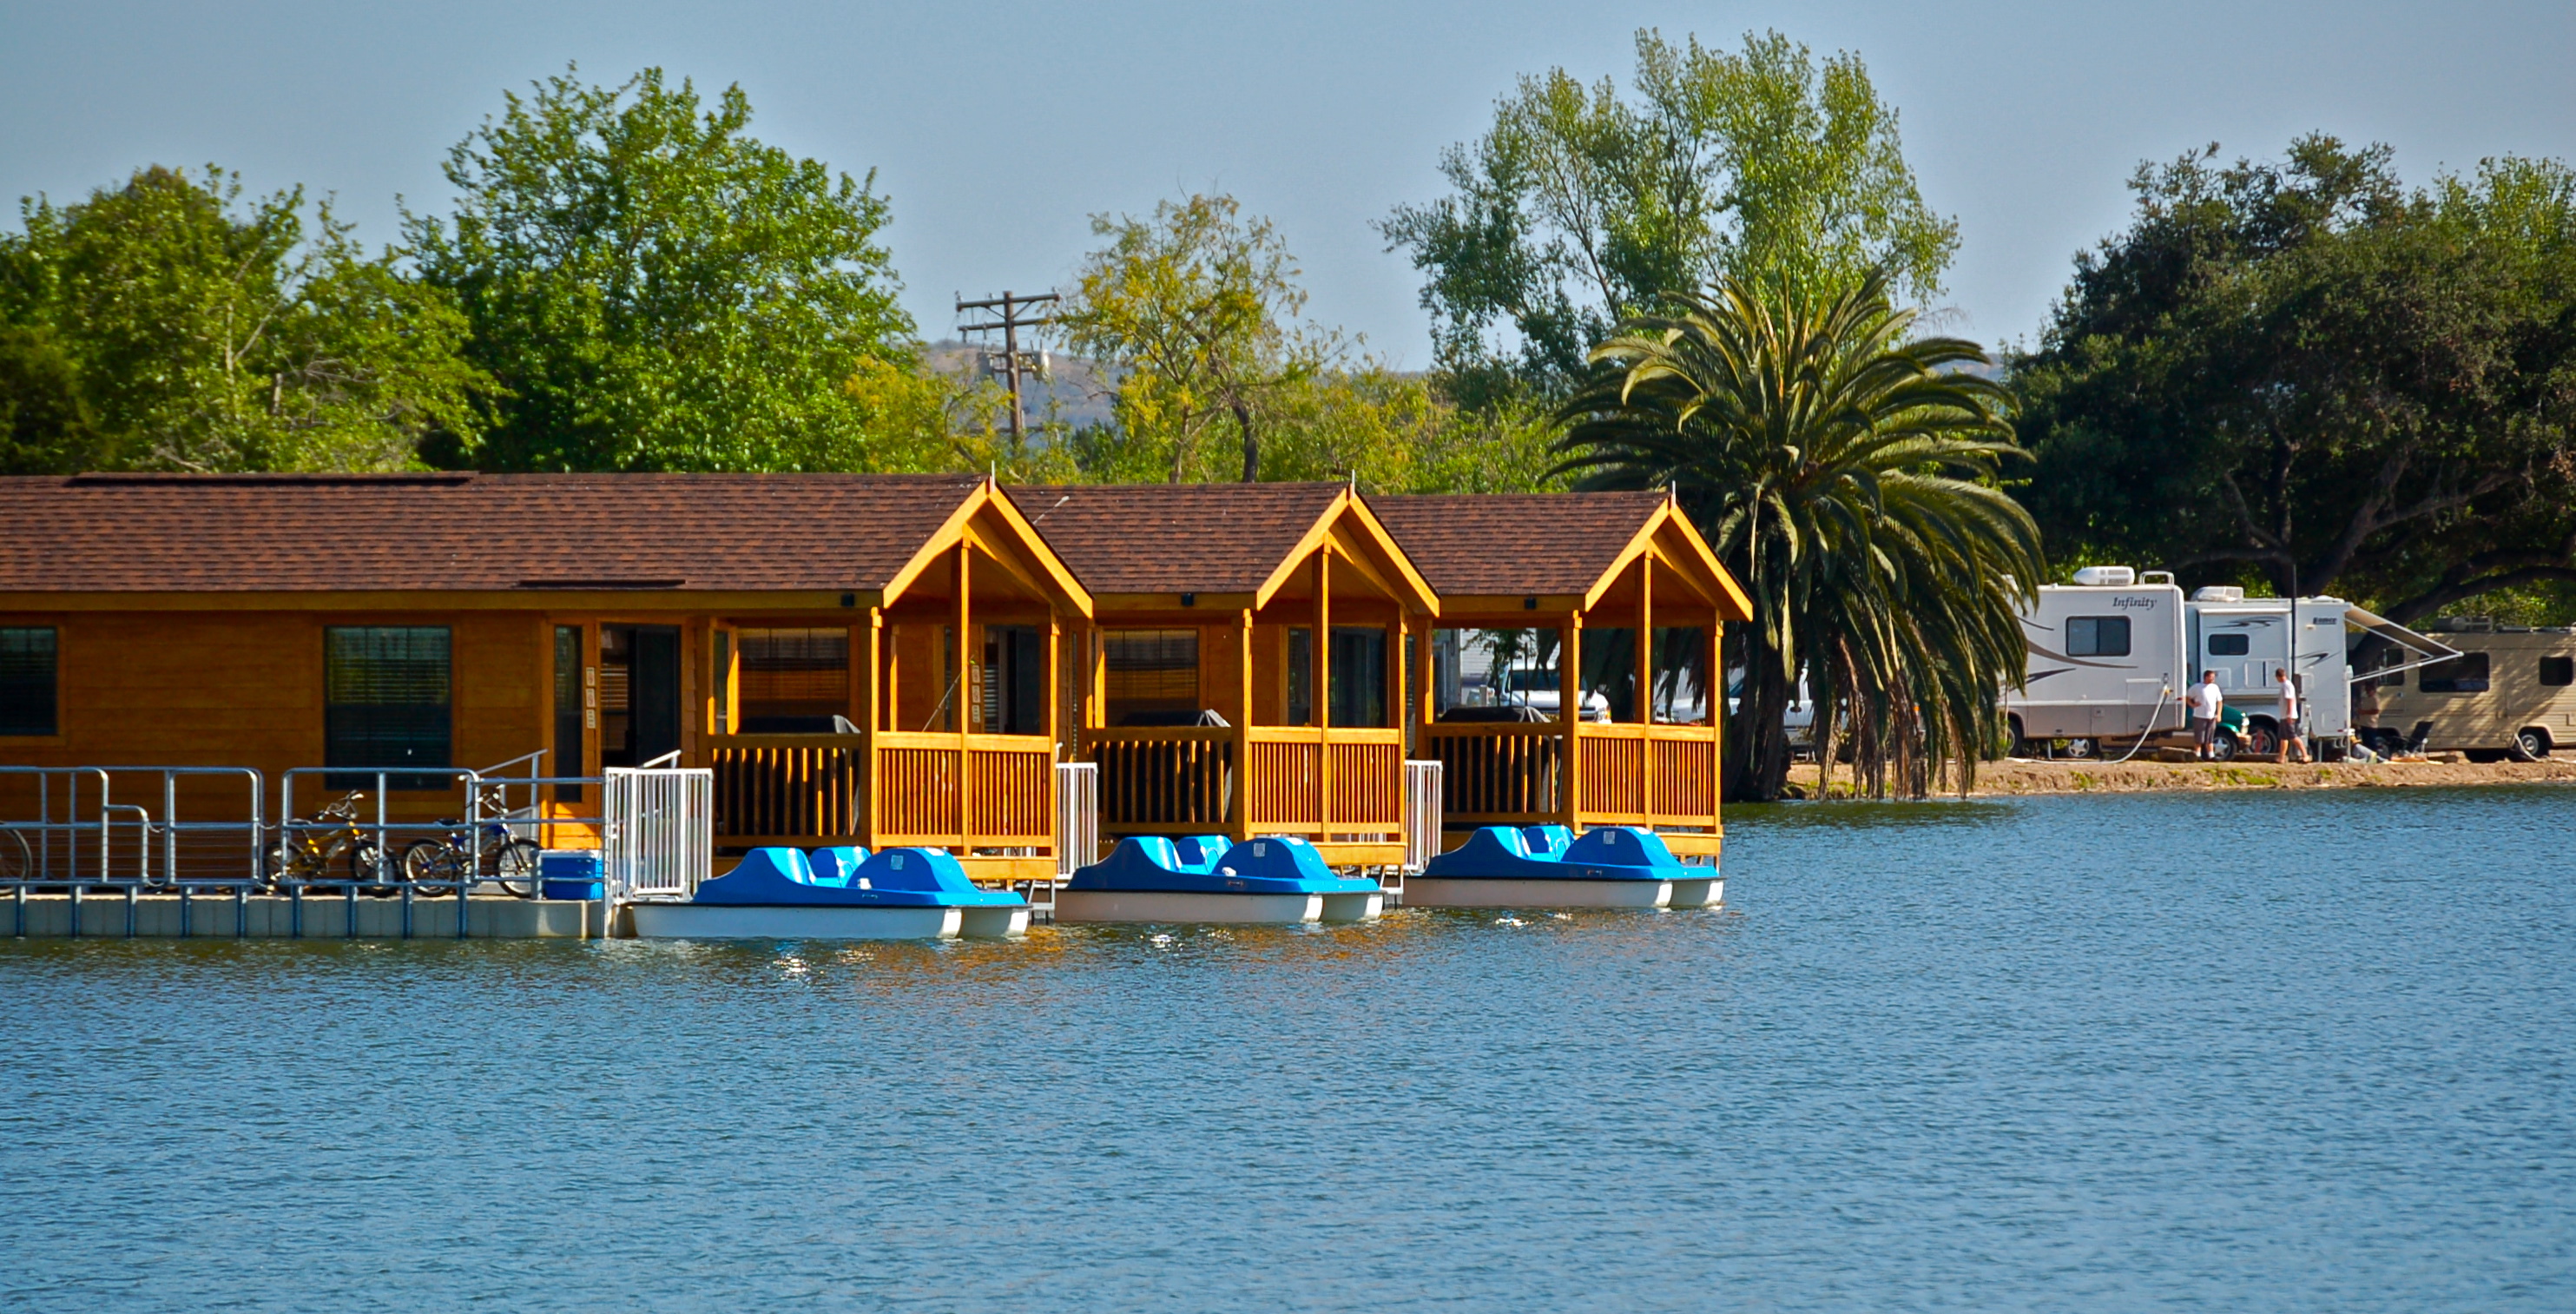 Floating cabins